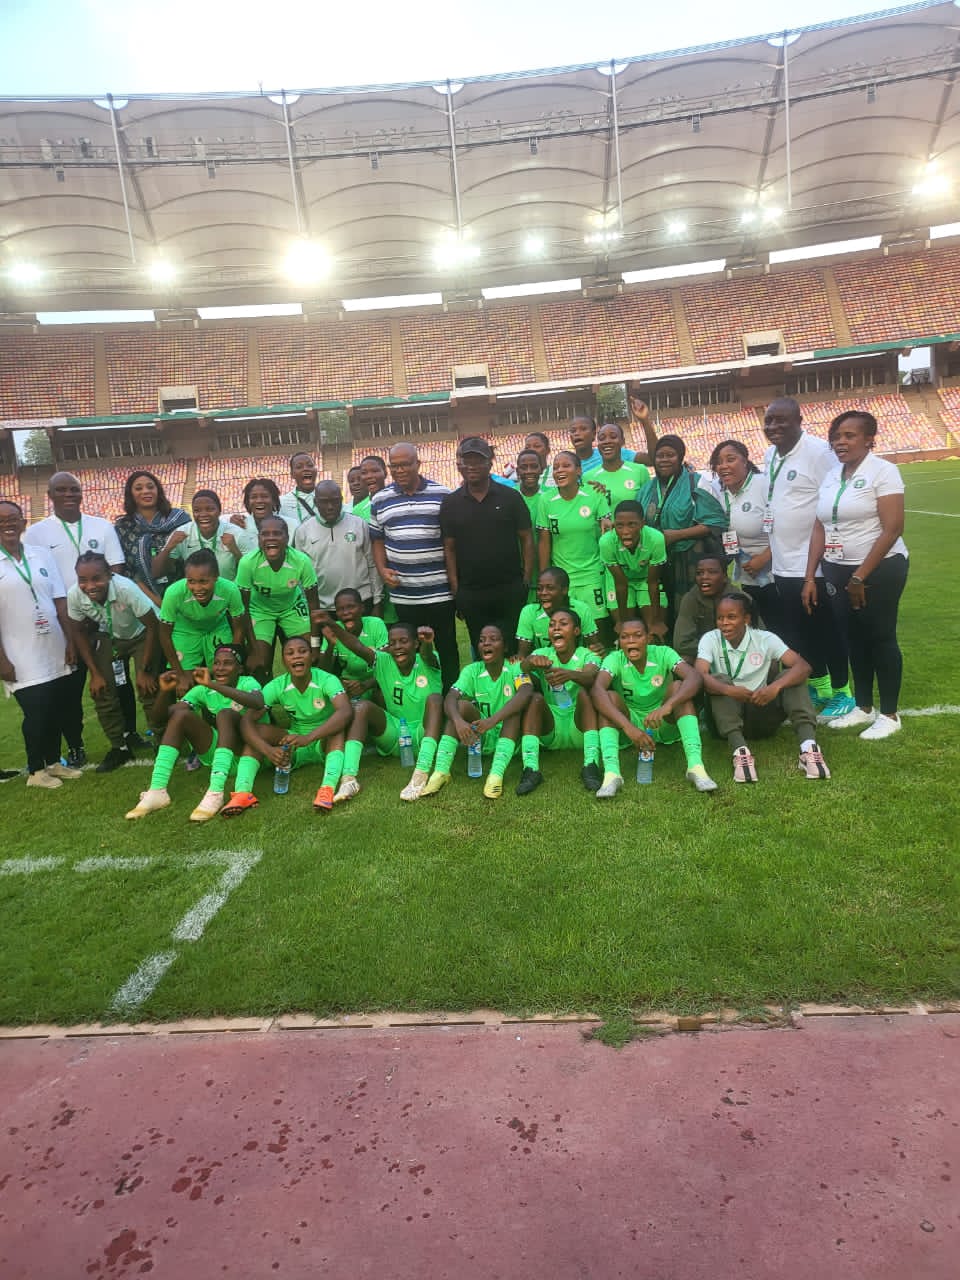 Nigeria reached the final round of the African qualification series for this year’s FIFA U17 Women’s World Cup finals after a 6-0 defeat